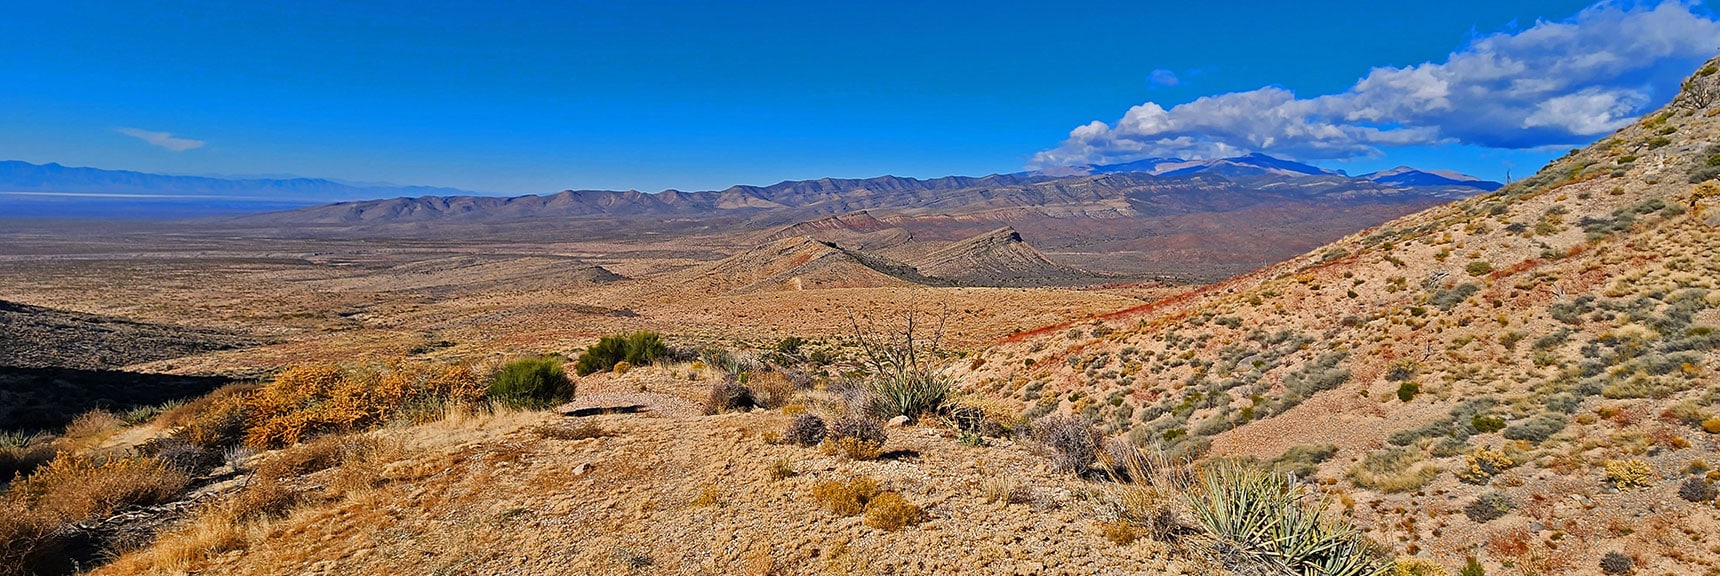 View Northwest from Upper End of Chute Canyon Road | Landmark Bluff Summit | Lovell Canyon, Nevada